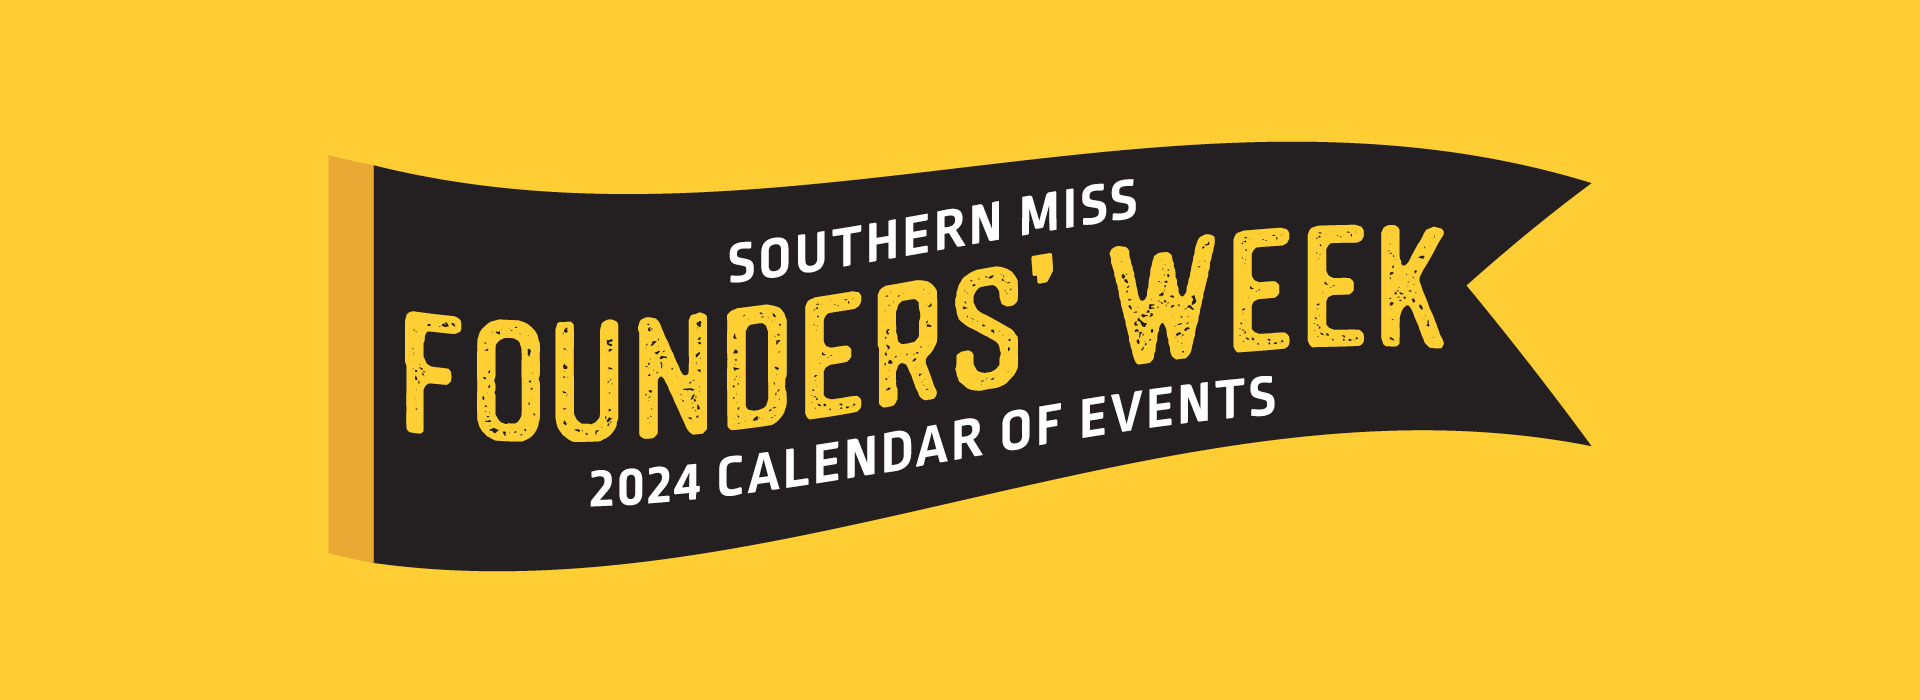 Southern Miss Founder's Week Calendar of Events 2024